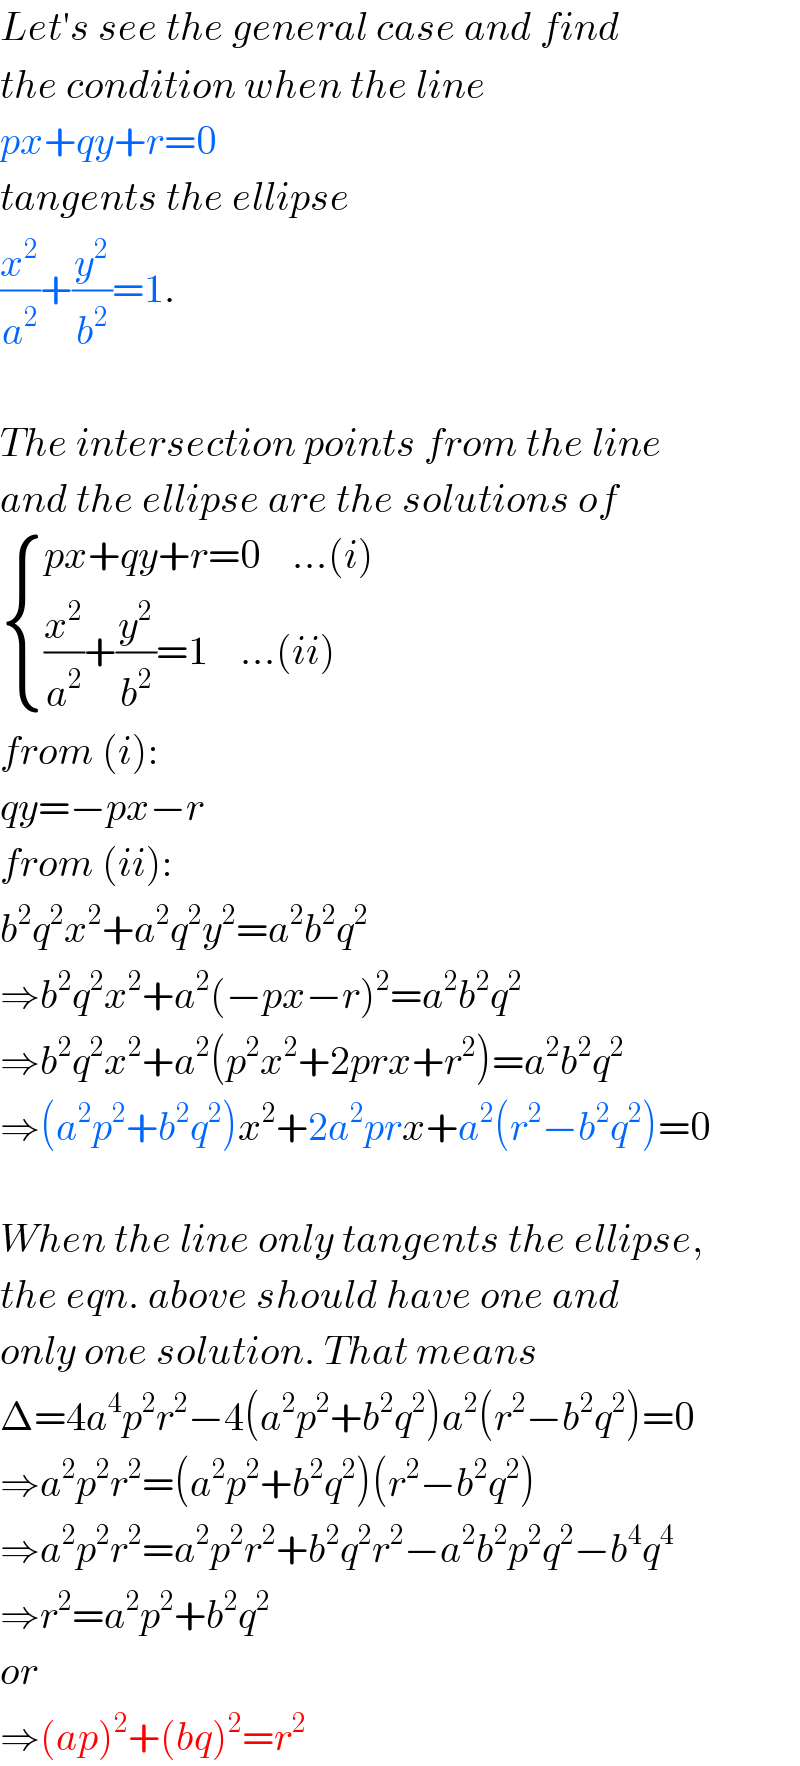 Let′s see the general case and find  the condition when the line  px+qy+r=0  tangents the ellipse  (x^2 /a^2 )+(y^2 /b^2 )=1.    The intersection points from the line  and the ellipse are the solutions of   { ((px+qy+r=0    ...(i))),(((x^2 /a^2 )+(y^2 /b^2 )=1    ...(ii))) :}  from (i):  qy=−px−r  from (ii):  b^2 q^2 x^2 +a^2 q^2 y^2 =a^2 b^2 q^2   ⇒b^2 q^2 x^2 +a^2 (−px−r)^2 =a^2 b^2 q^2   ⇒b^2 q^2 x^2 +a^2 (p^2 x^2 +2prx+r^2 )=a^2 b^2 q^2   ⇒(a^2 p^2 +b^2 q^2 )x^2 +2a^2 prx+a^2 (r^2 −b^2 q^2 )=0    When the line only tangents the ellipse,  the eqn. above should have one and  only one solution. That means  Δ=4a^4 p^2 r^2 −4(a^2 p^2 +b^2 q^2 )a^2 (r^2 −b^2 q^2 )=0  ⇒a^2 p^2 r^2 =(a^2 p^2 +b^2 q^2 )(r^2 −b^2 q^2 )  ⇒a^2 p^2 r^2 =a^2 p^2 r^2 +b^2 q^2 r^2 −a^2 b^2 p^2 q^2 −b^4 q^4   ⇒r^2 =a^2 p^2 +b^2 q^2   or  ⇒(ap)^2 +(bq)^2 =r^2   